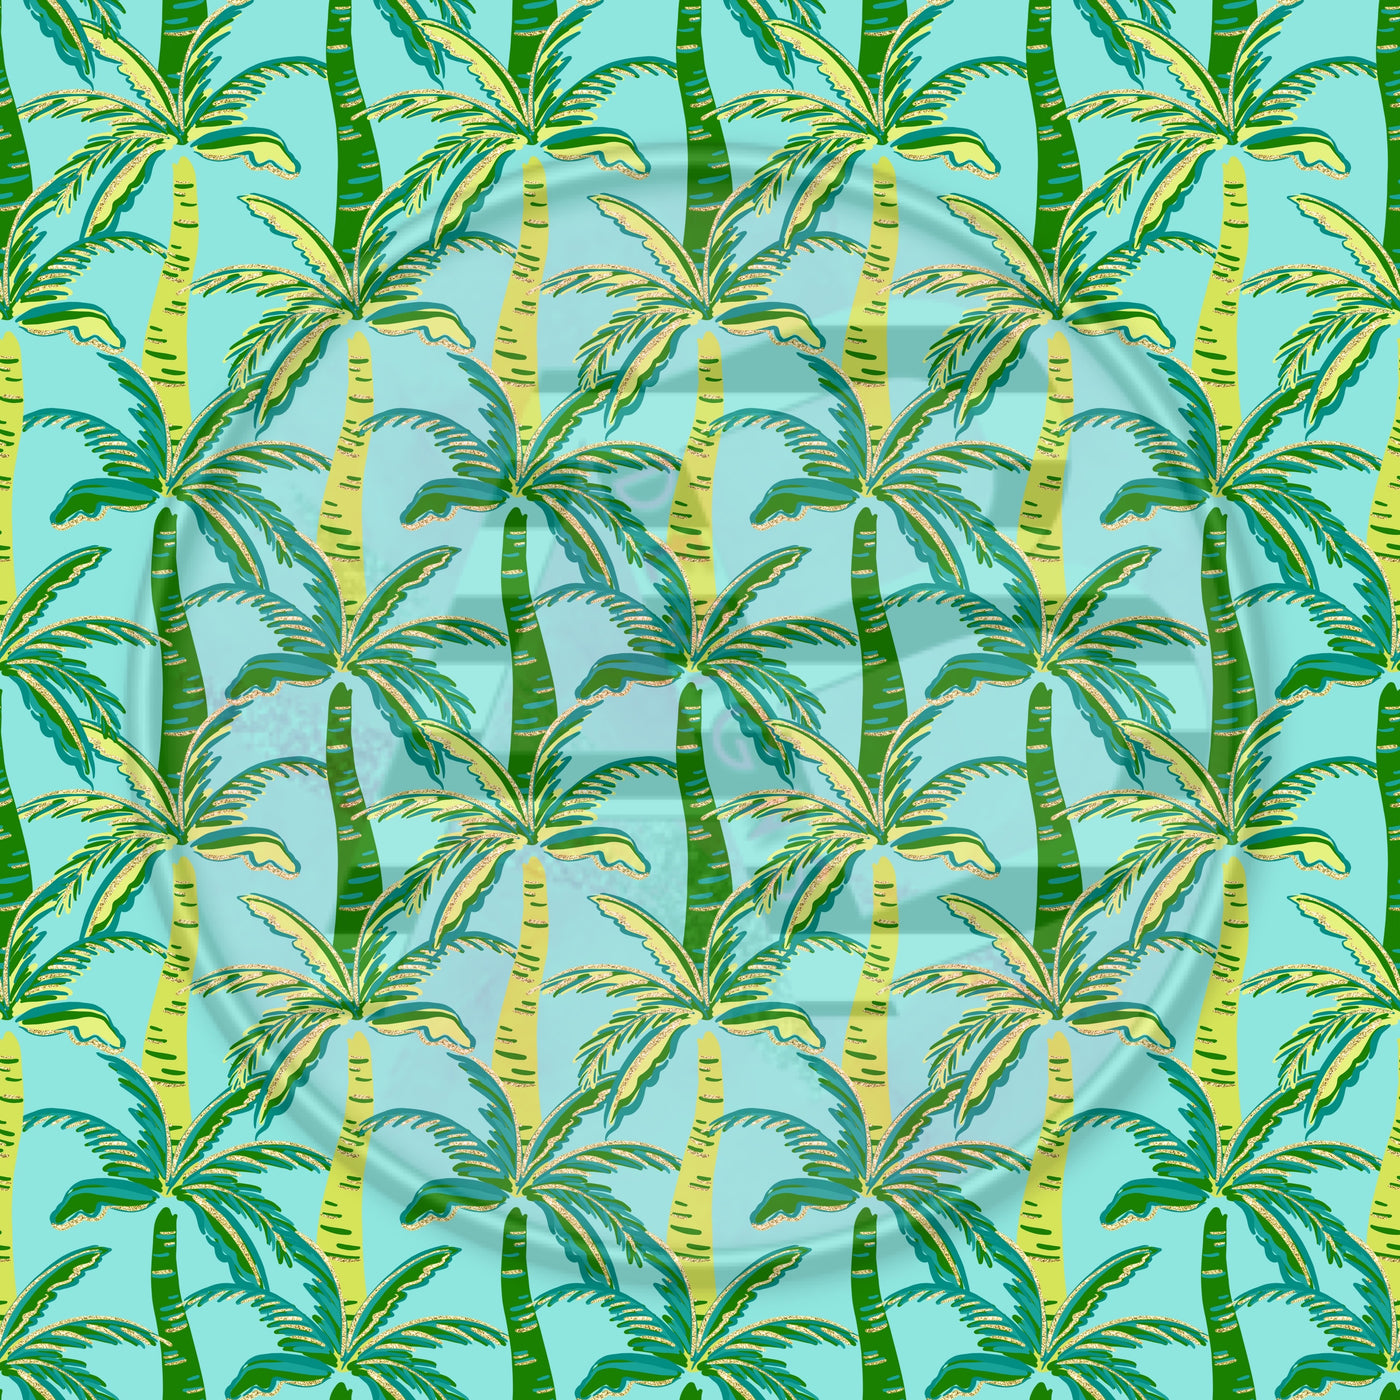 Adhesive Patterned Vinyl - Tropical 929